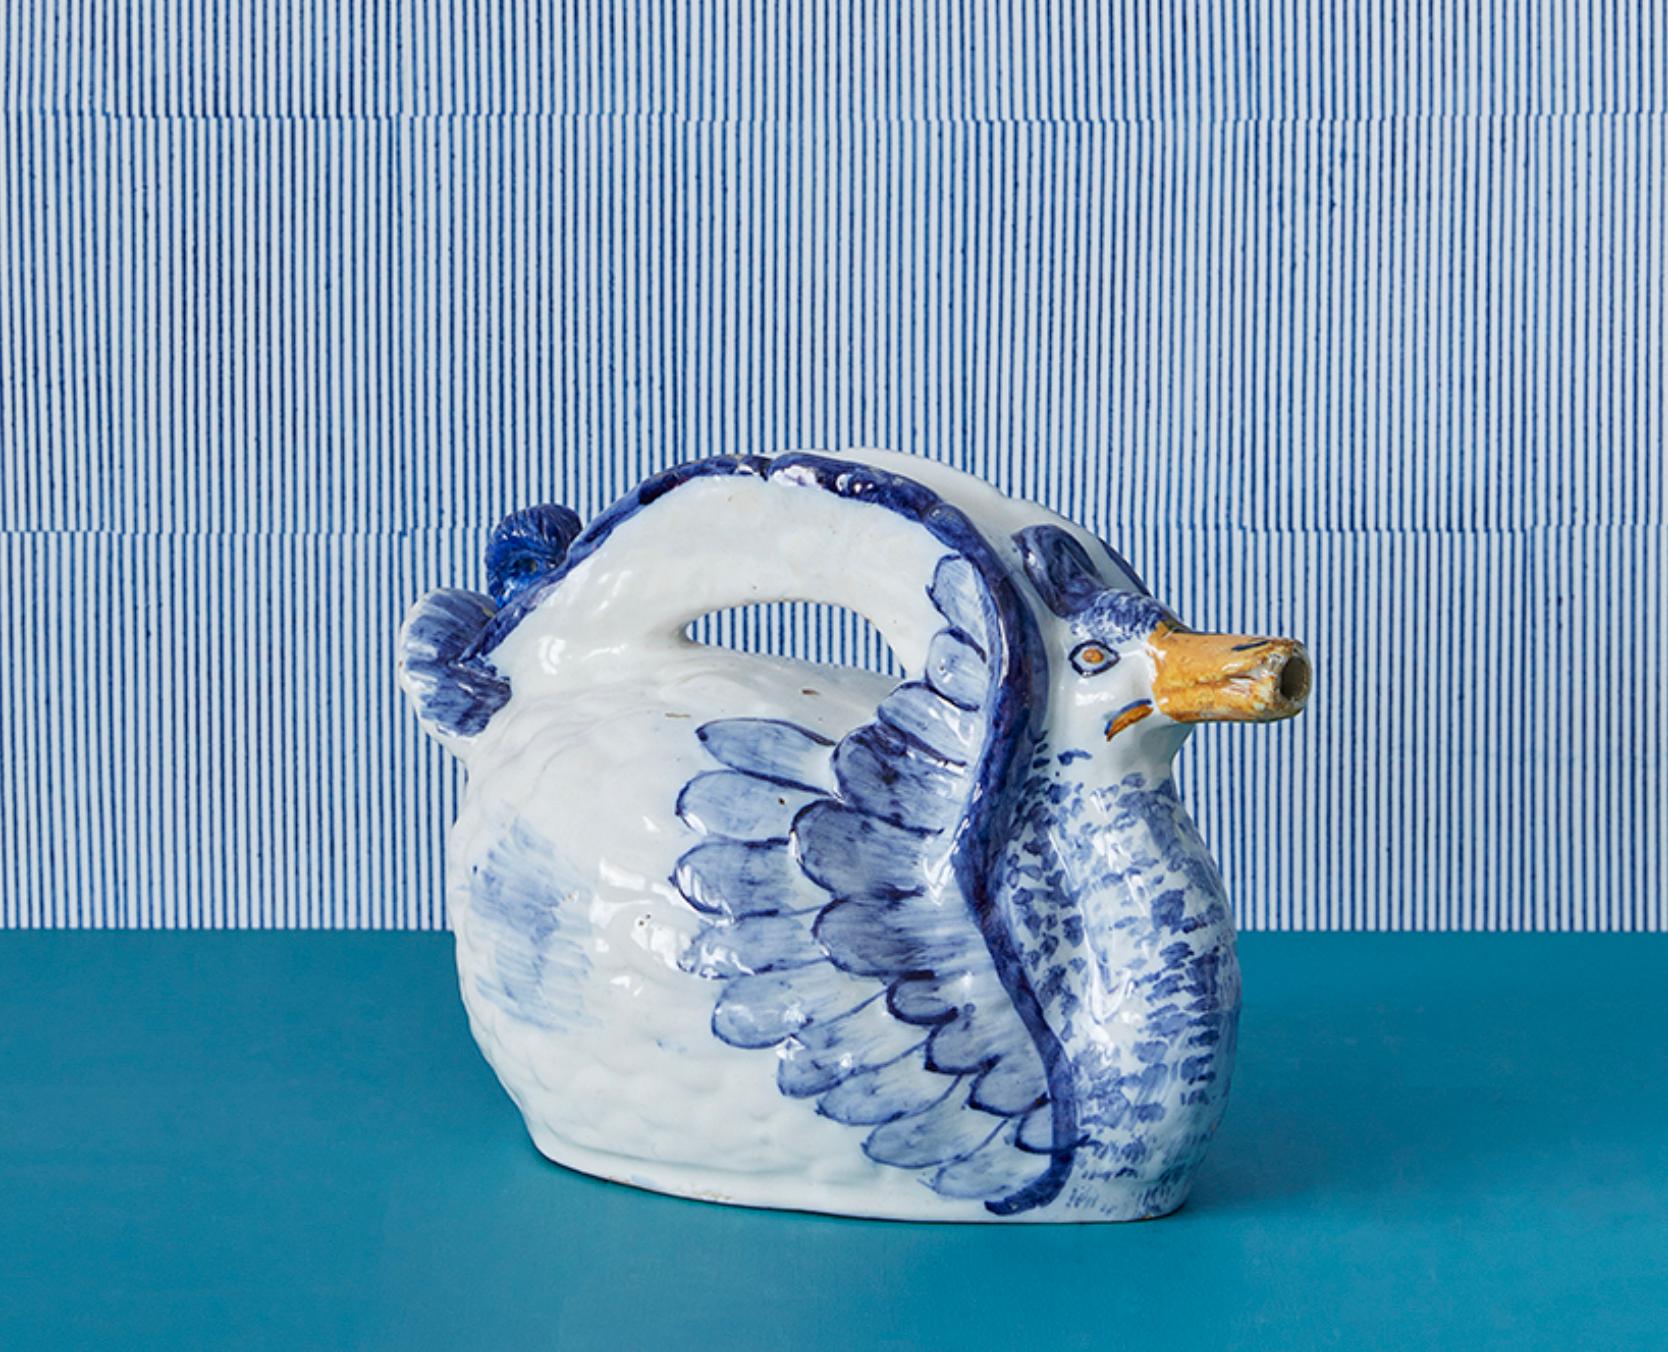 Portugal, 19th Century

Antique ceramic pitcher in the shape of a duck.

H 18 x W 29 x D 15 cm